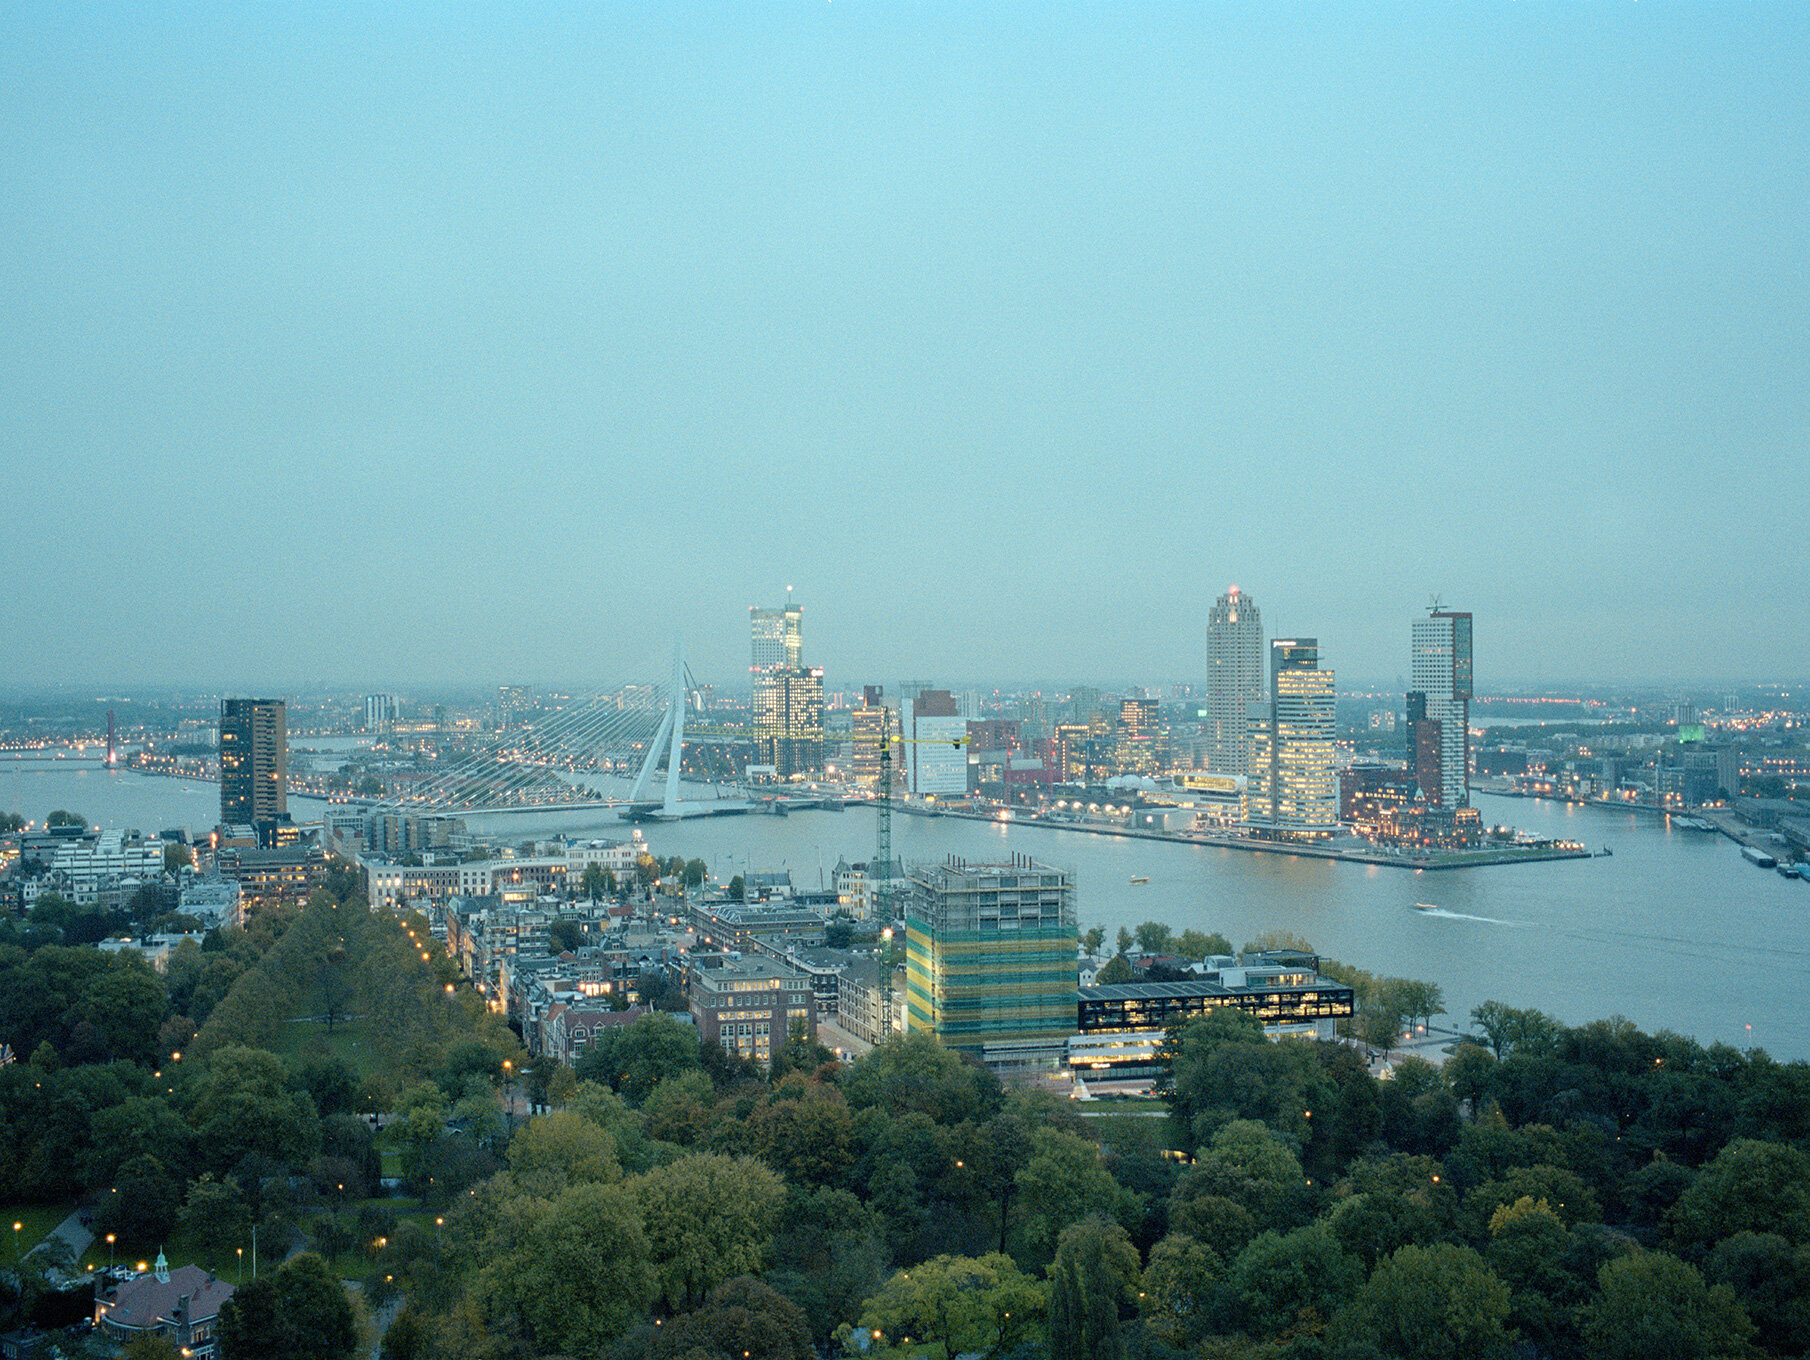   View from Euromast tower, Rotterdam, 2010  